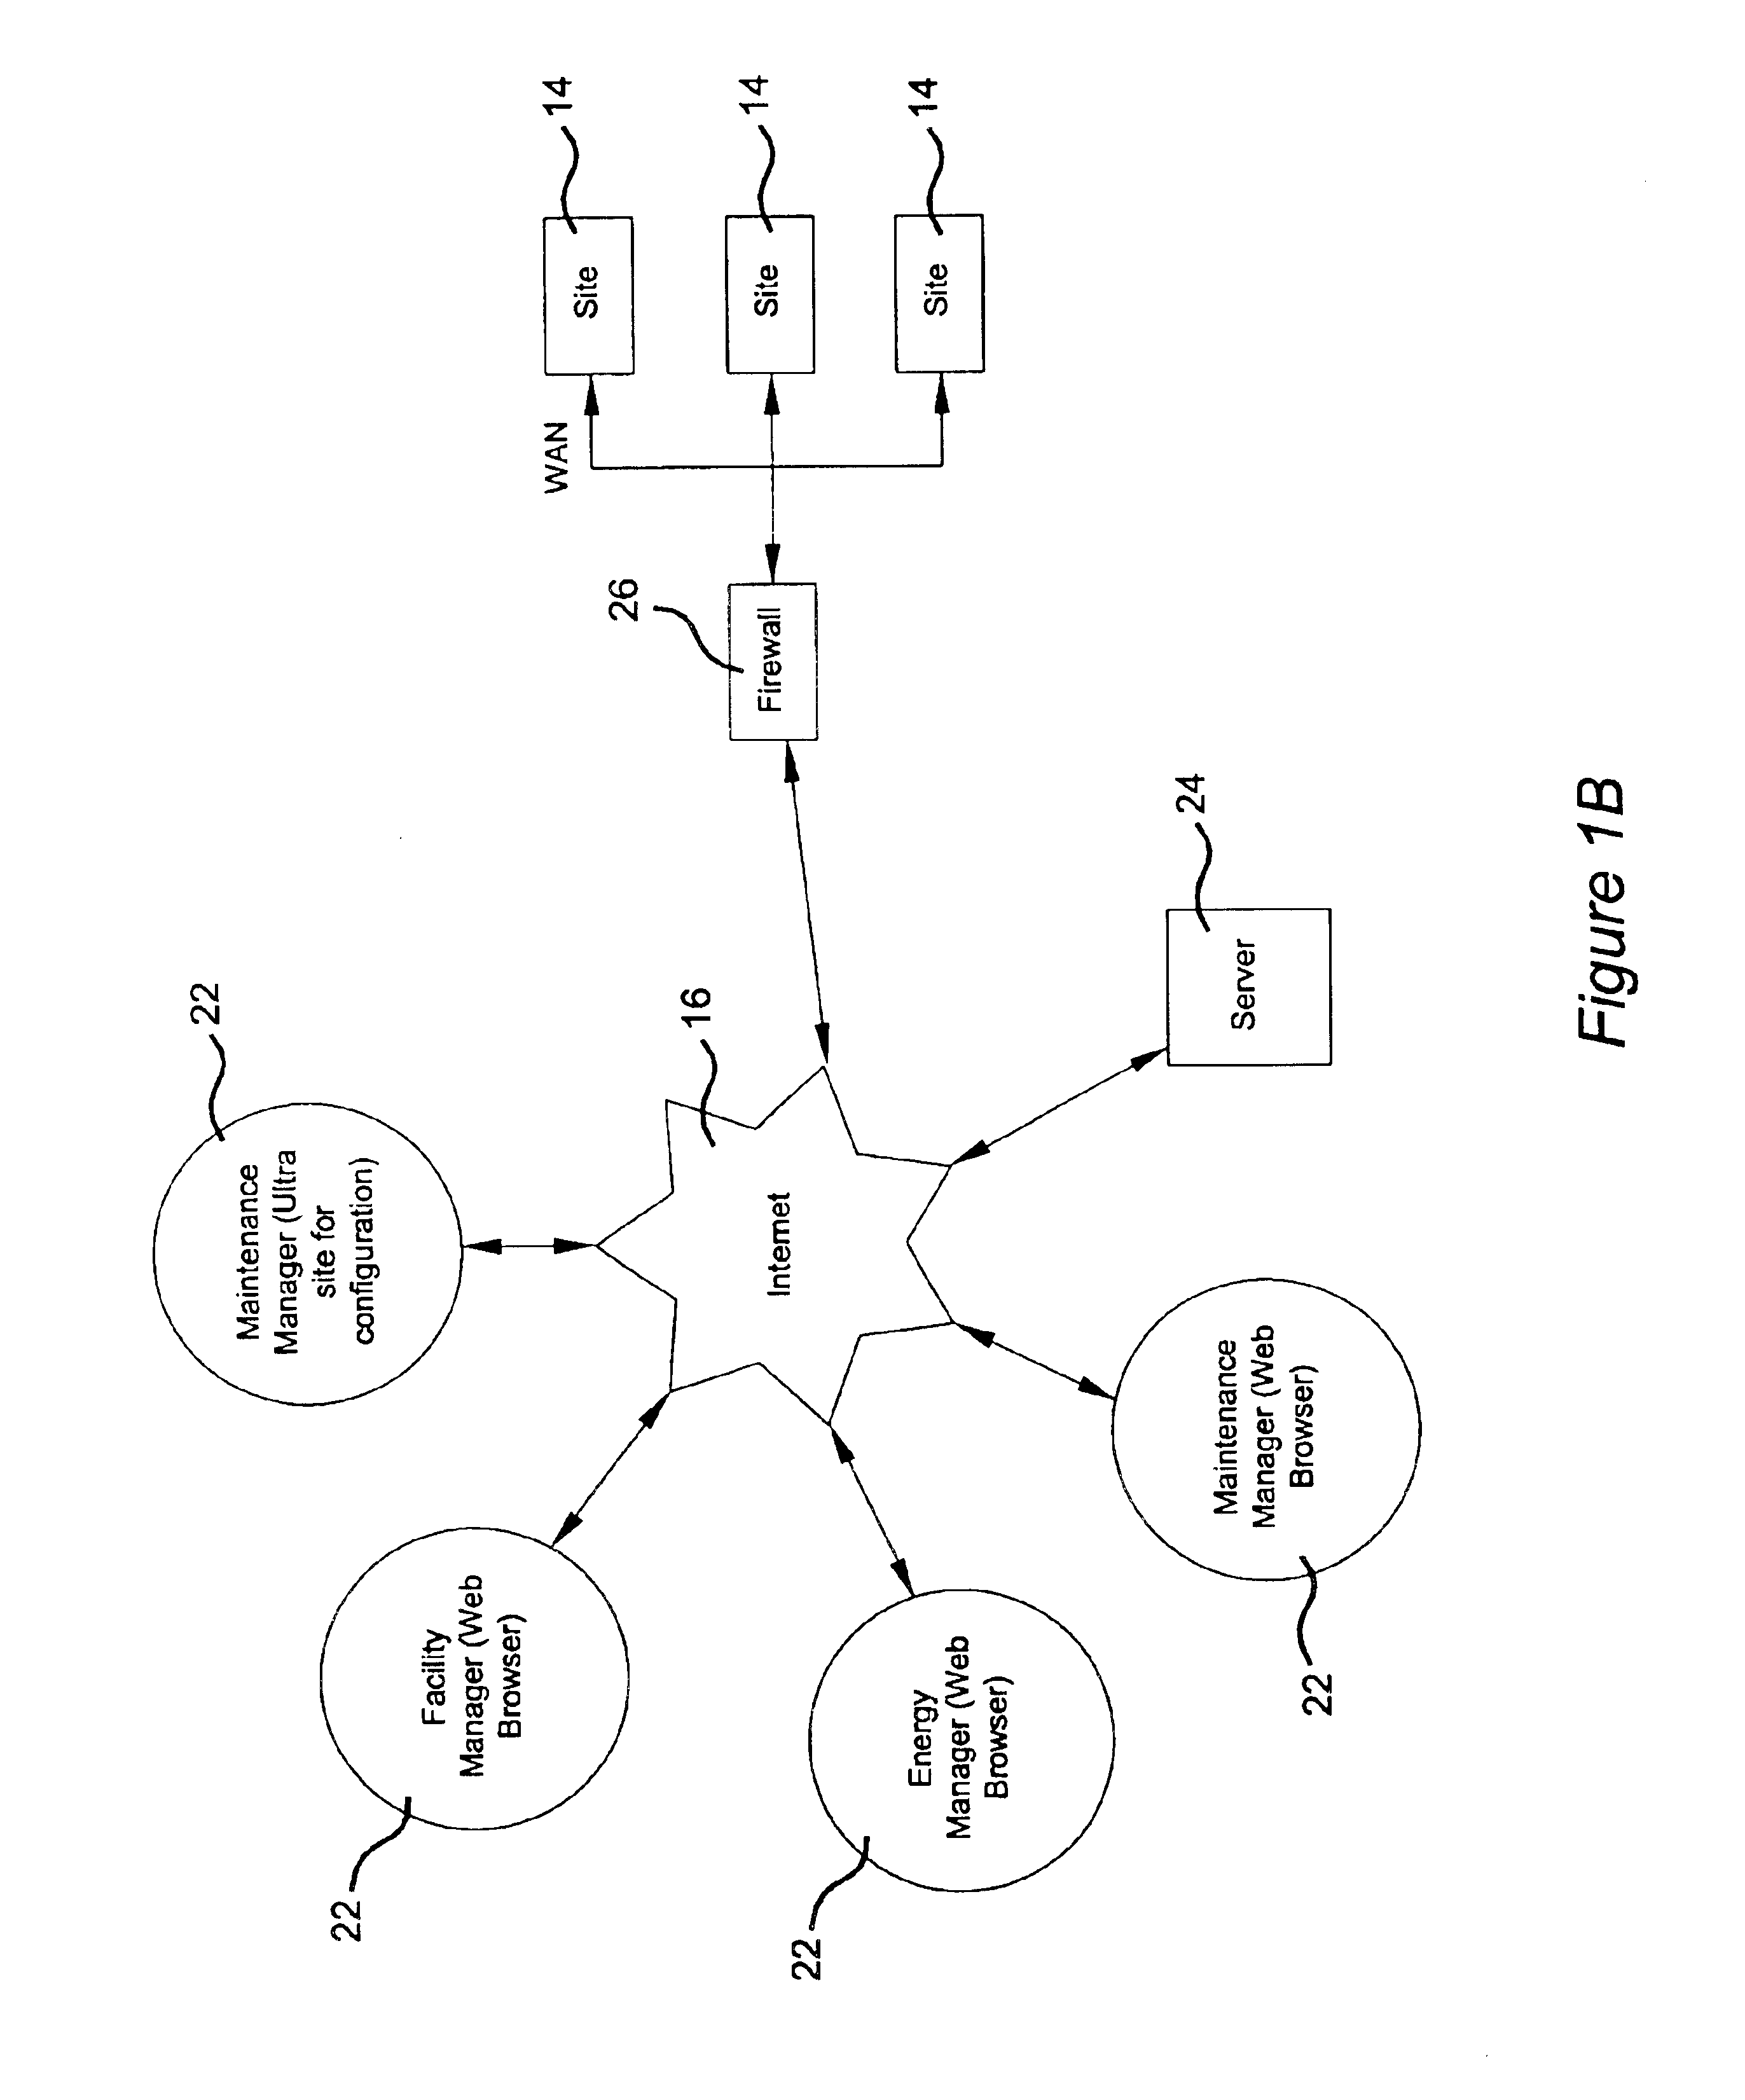 System for remote refrigeration monitoring and diagnostics